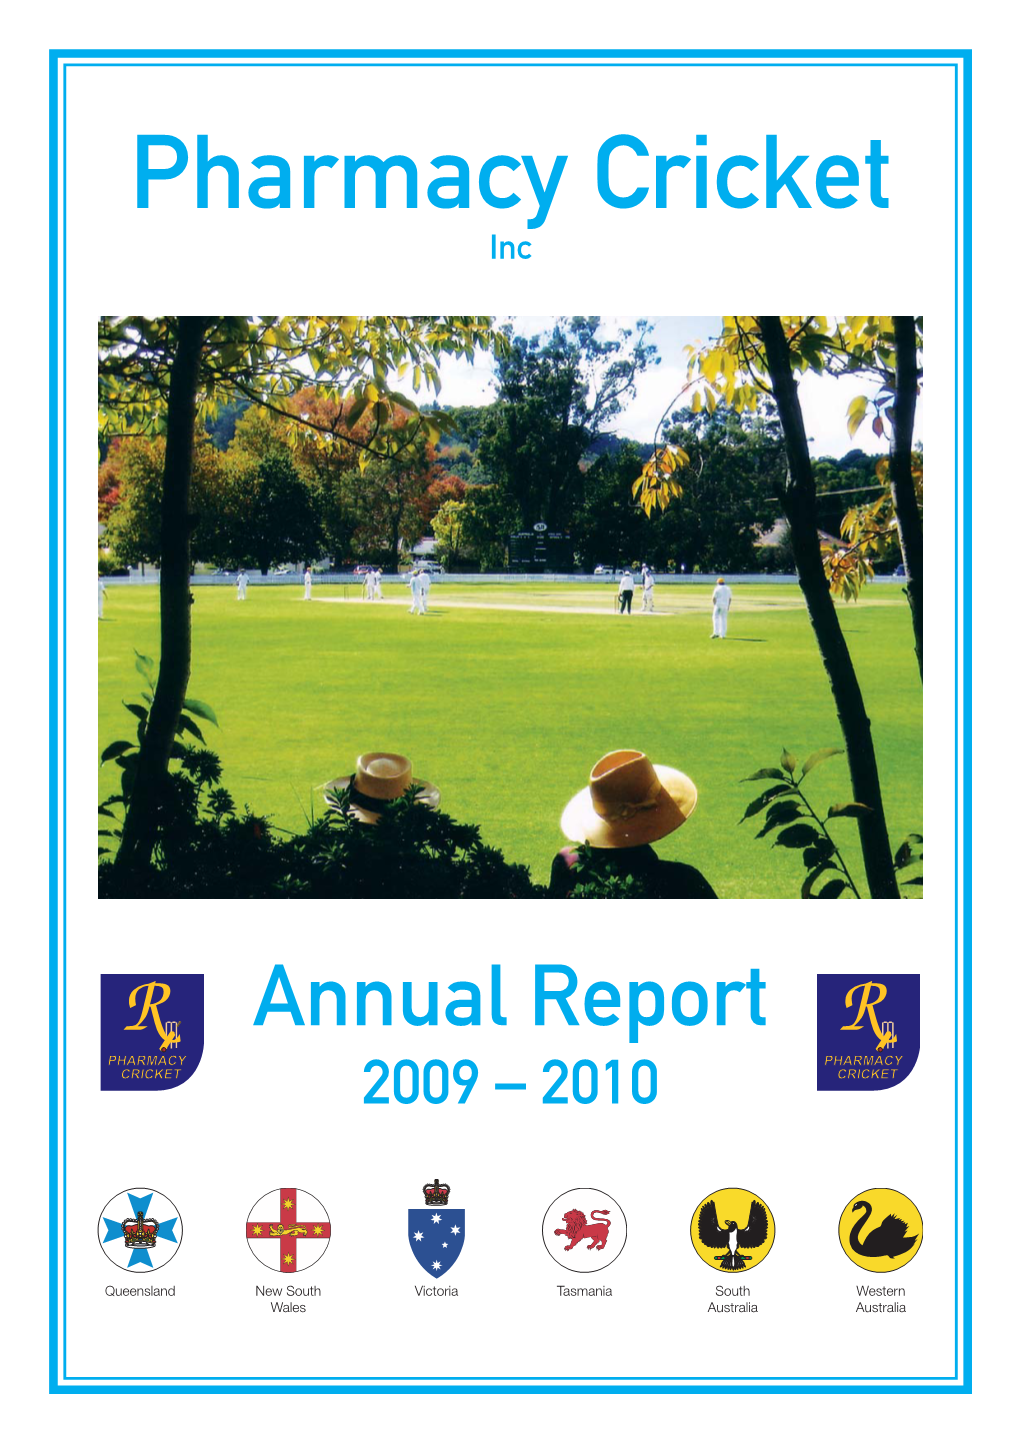 Pharmacy Cricket Annual Report 2009-2010